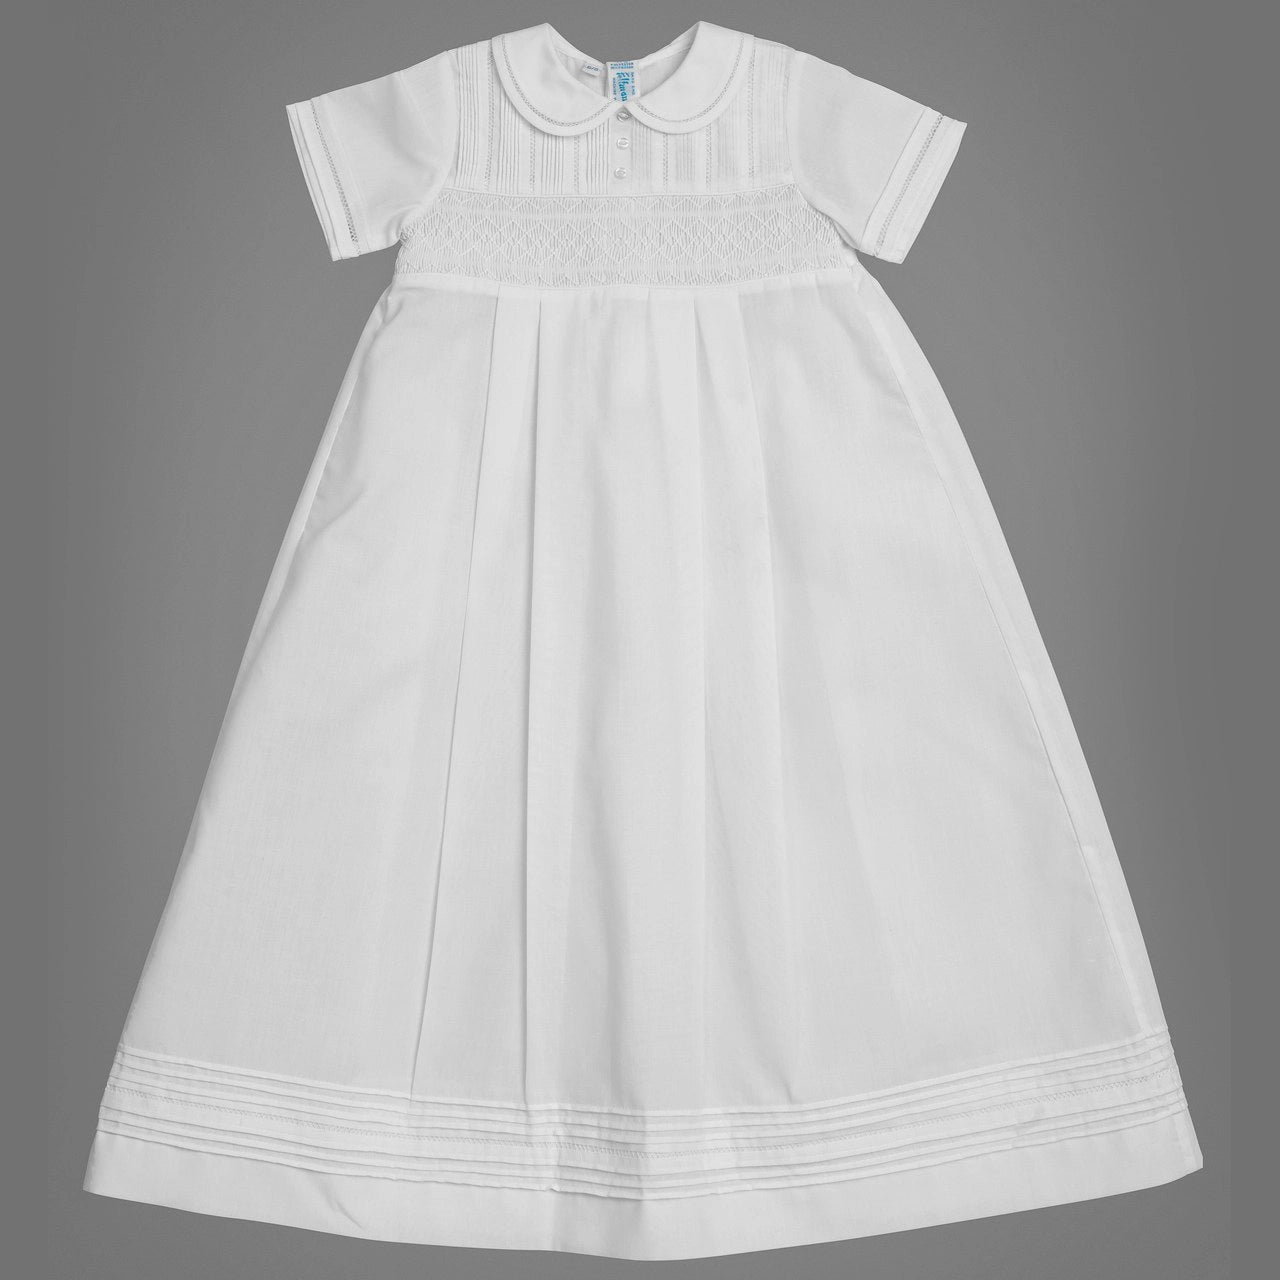 Boys Special Occasion Smocked Set